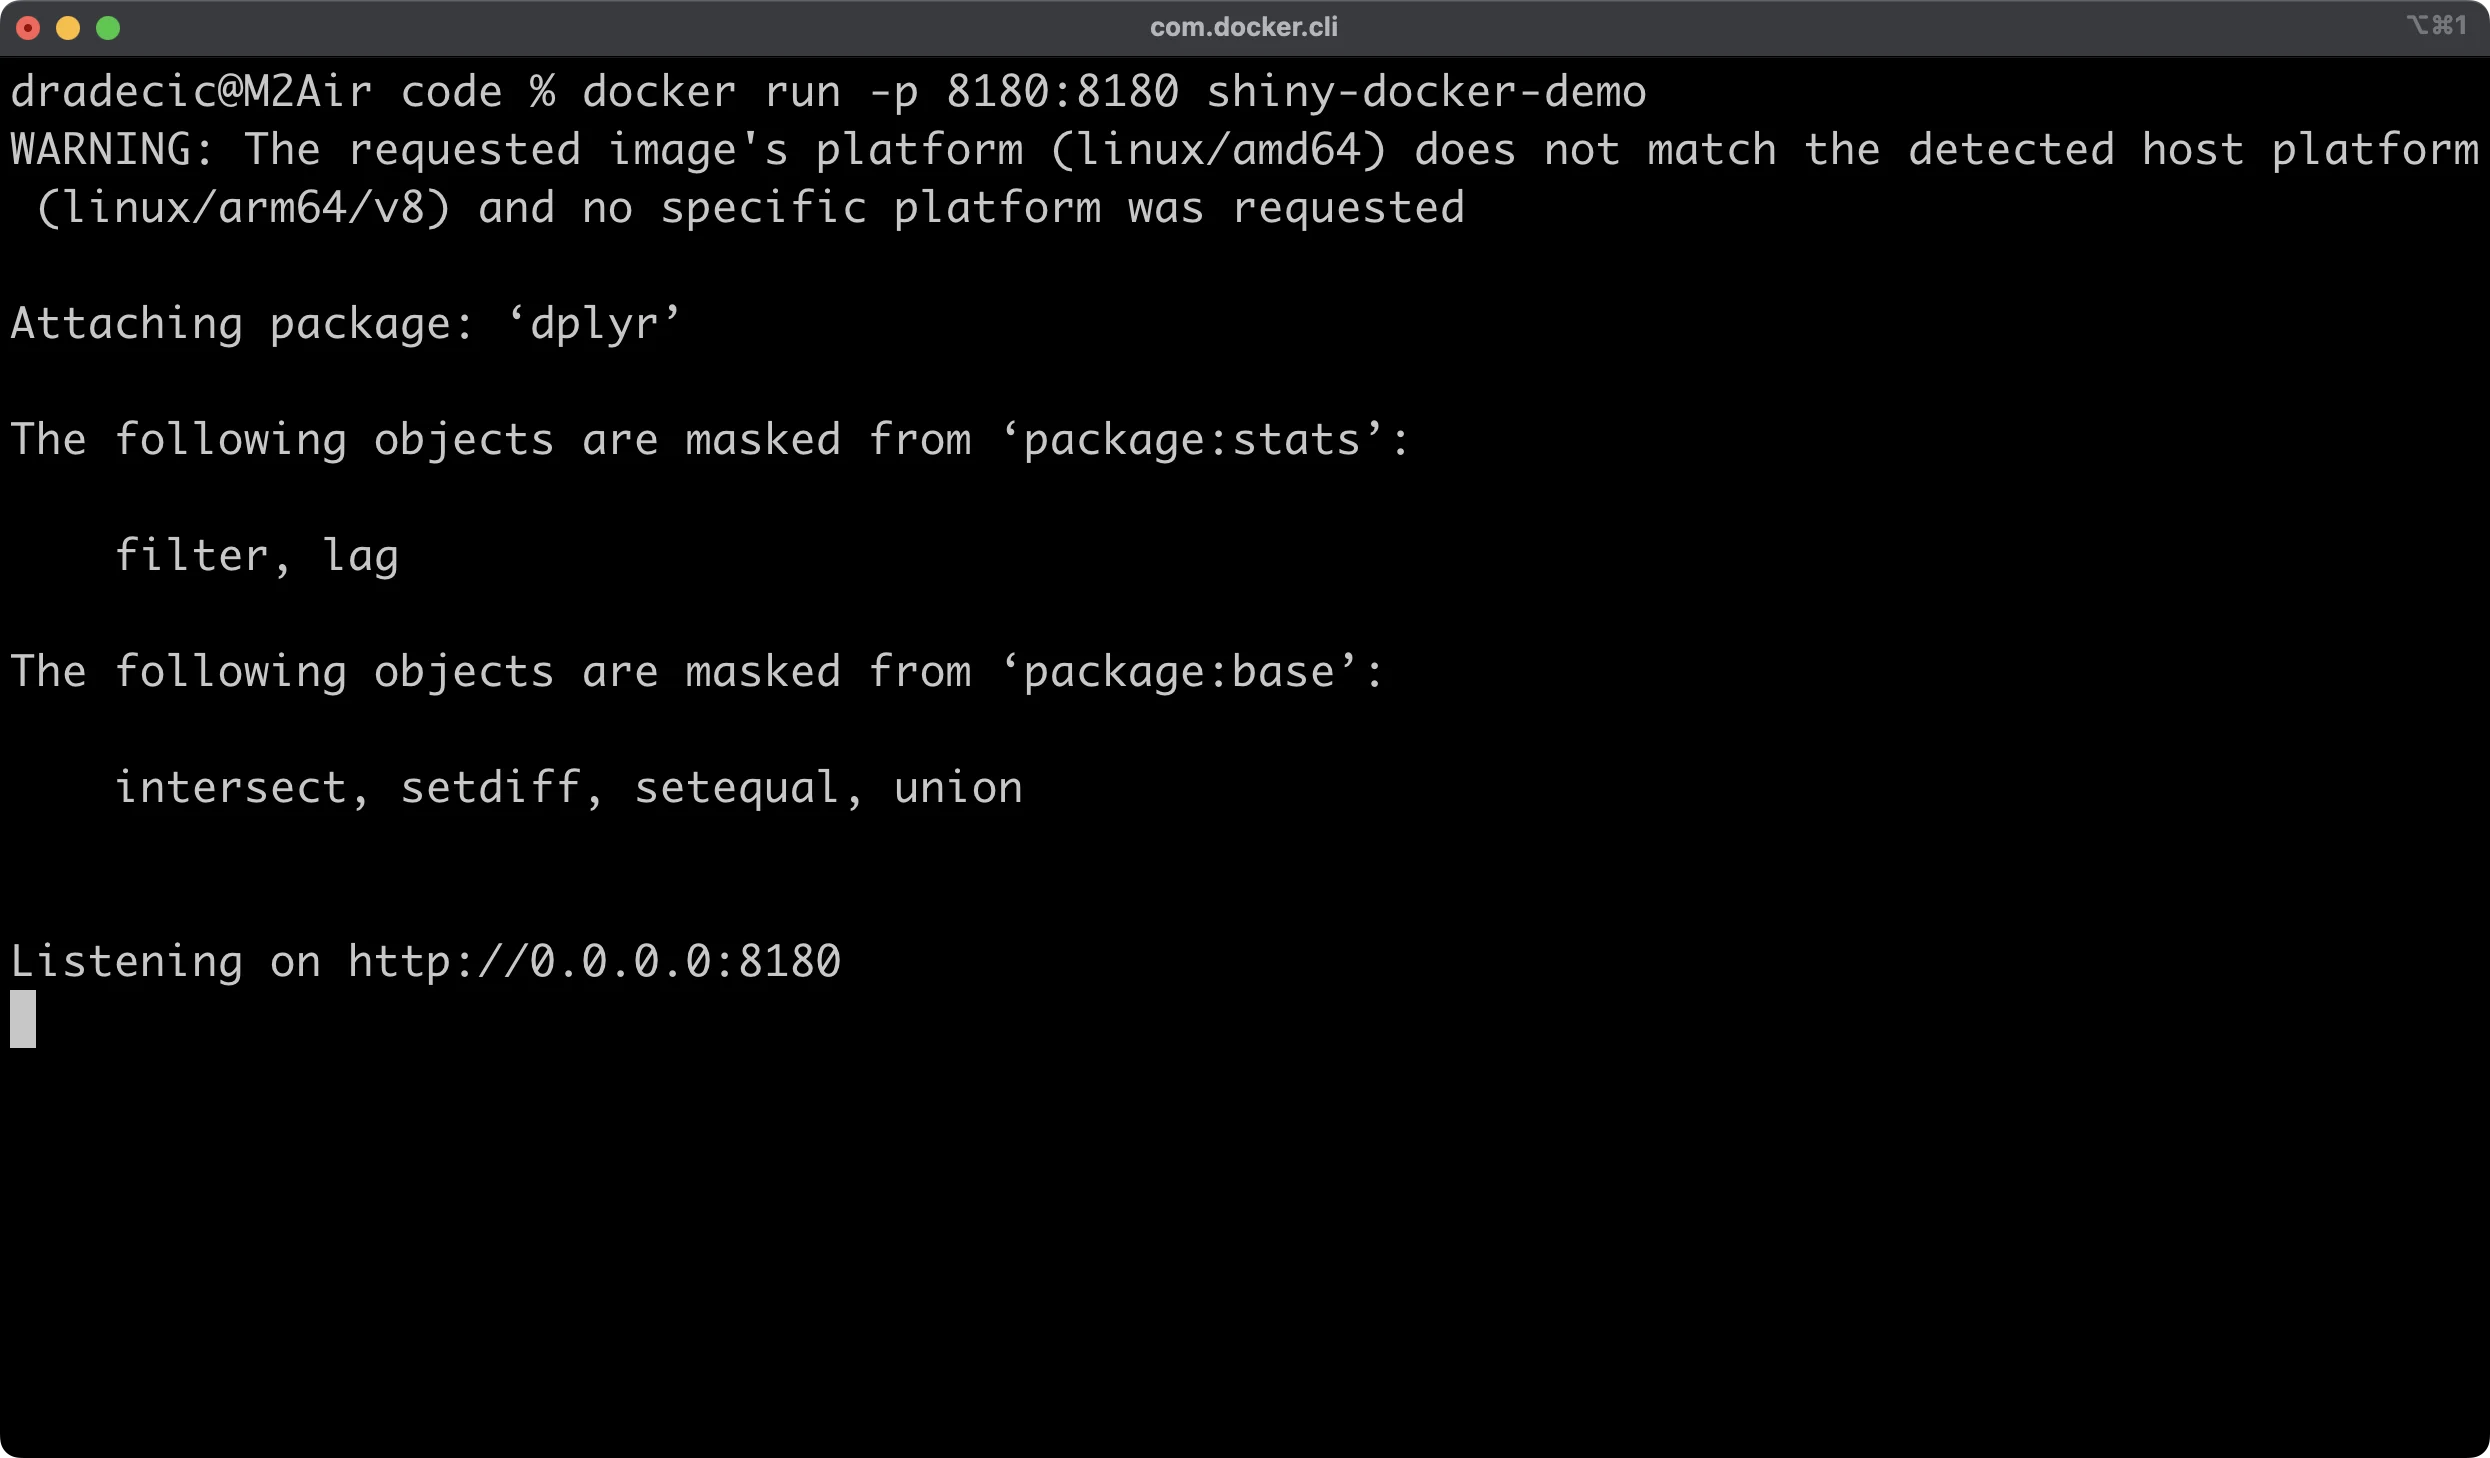 Image 5 - Running the Docker container